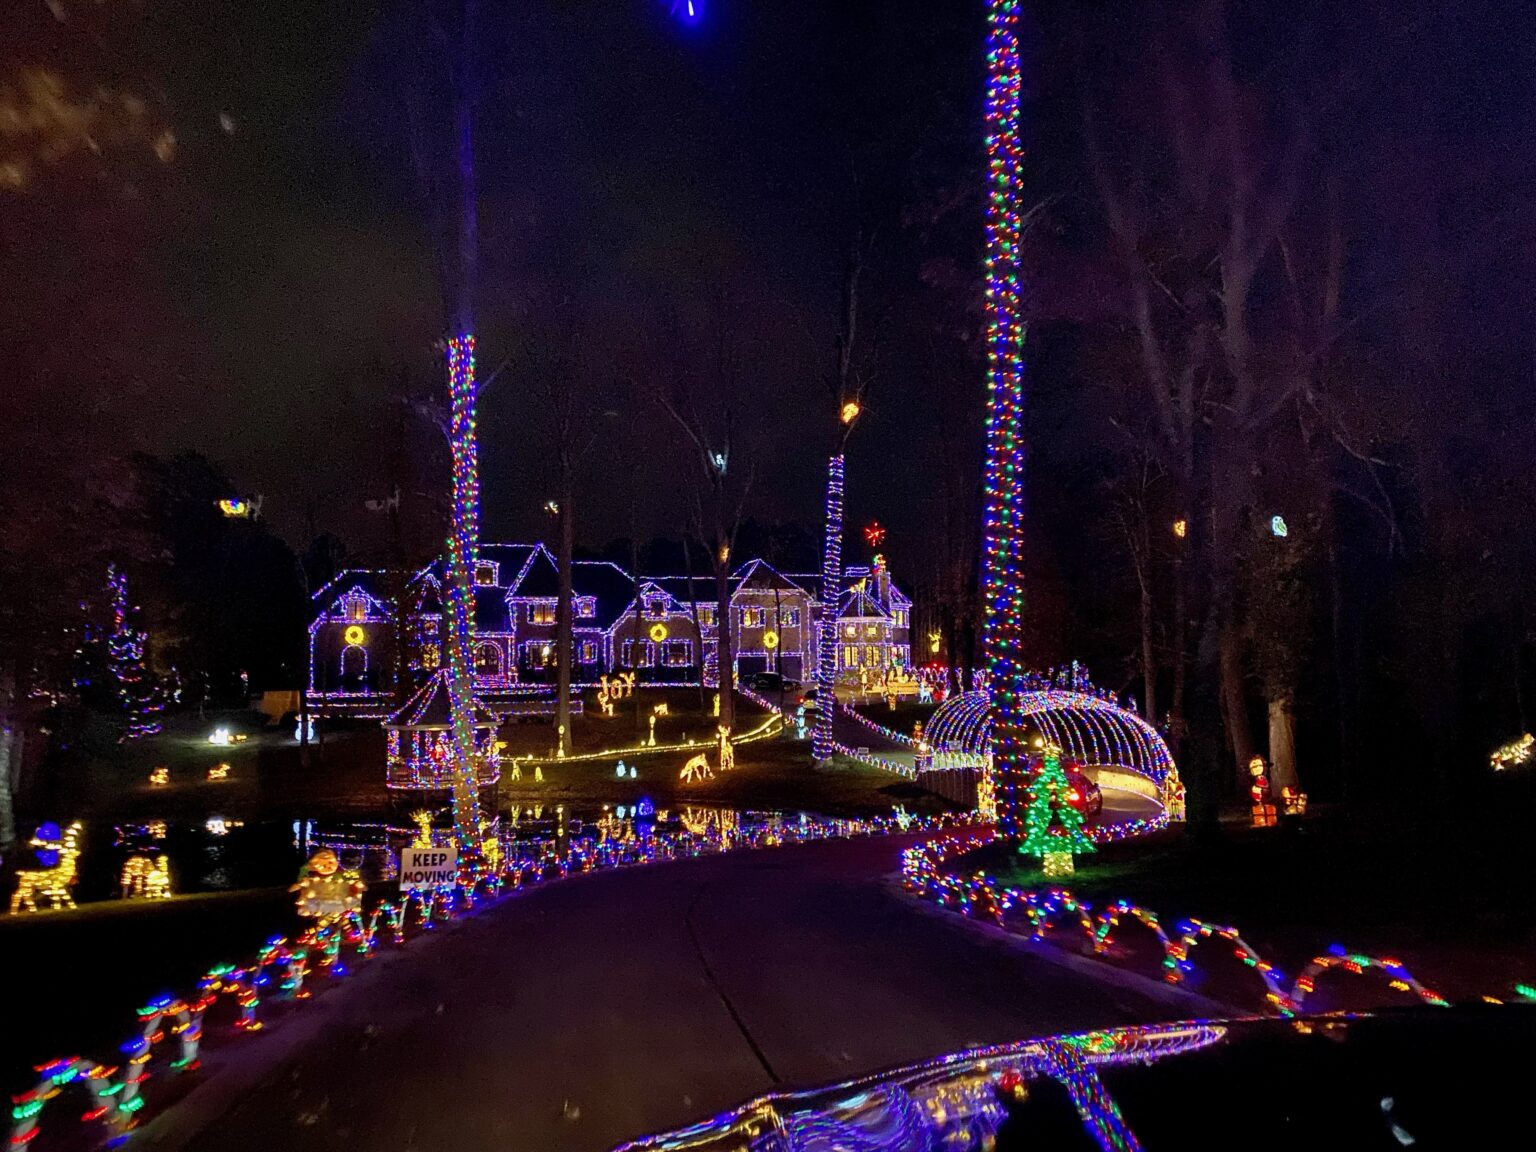 A Trip Through the Holt Road Christmas Lights CaryCitizen